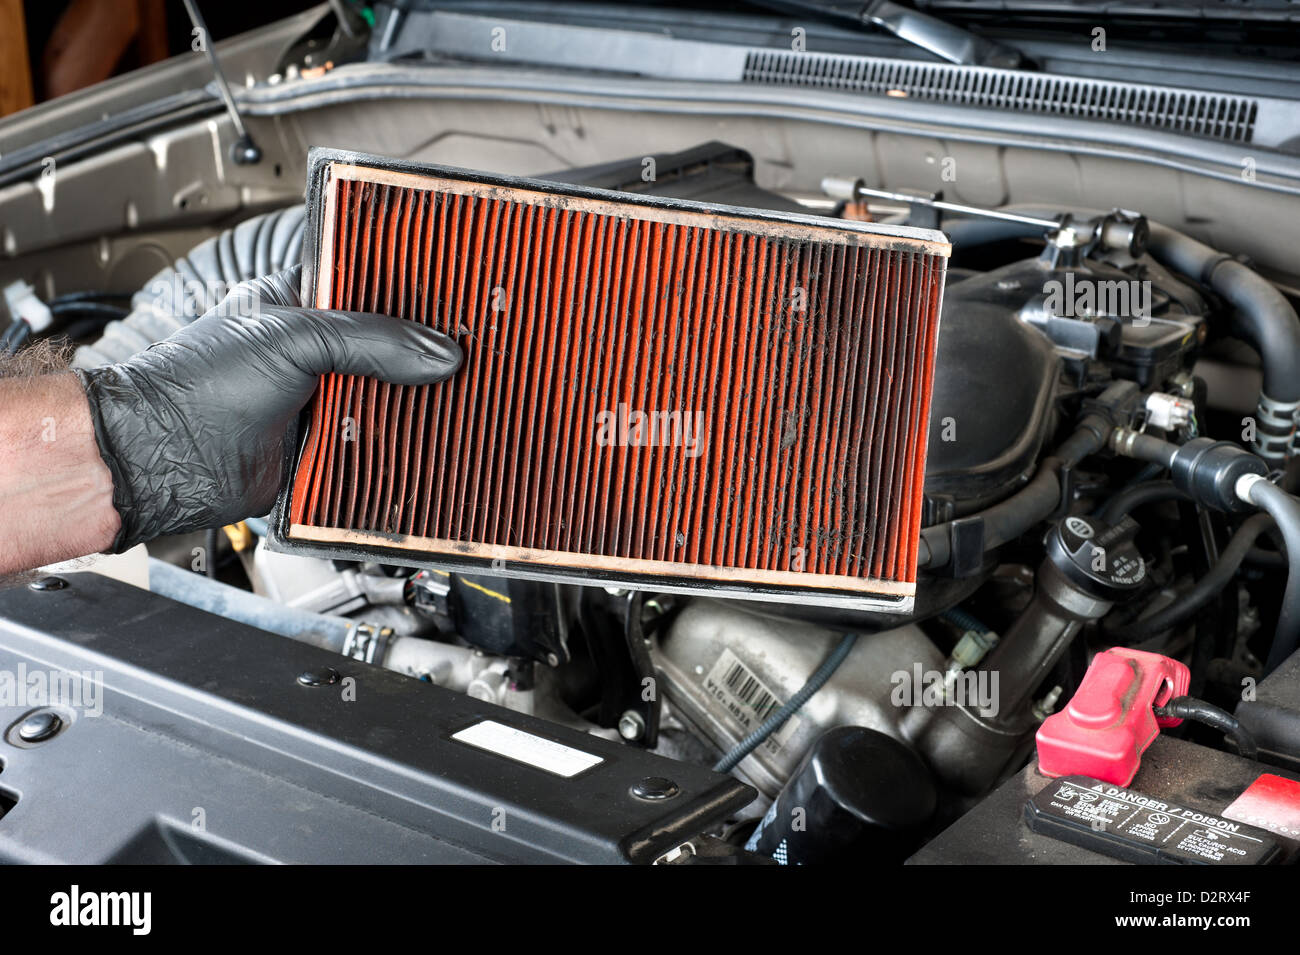 An auto mechanic wearing protective work gloves holds a dirty, clogged air filter Stock Photo